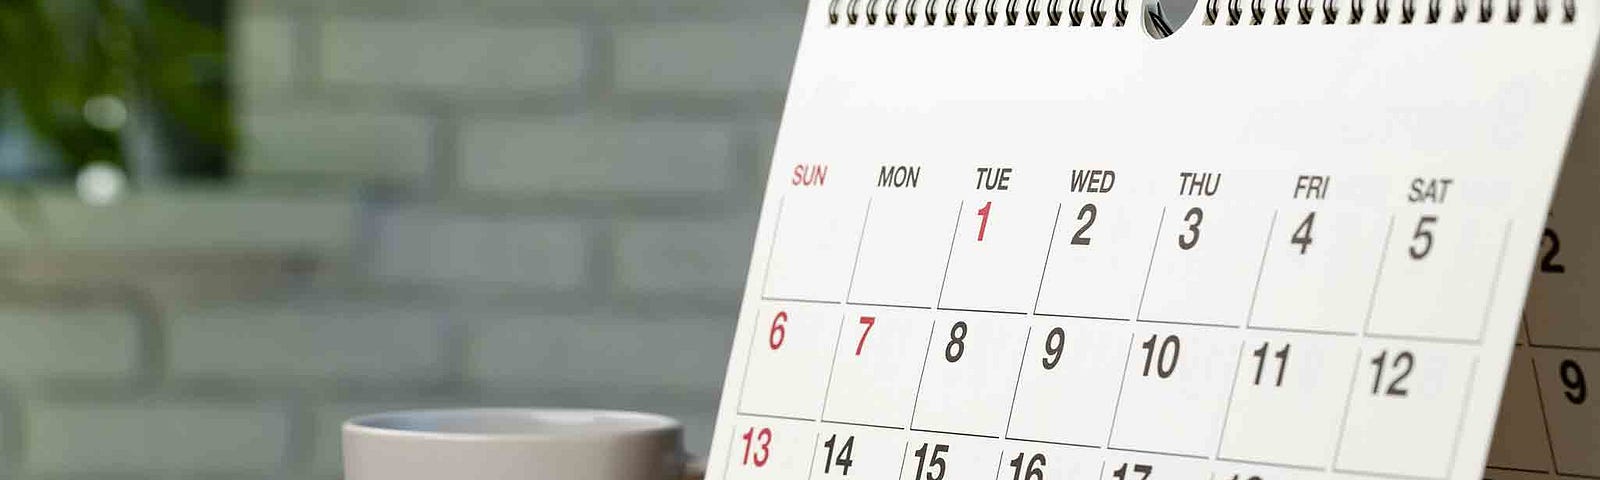 Unmarked calendar propped up on a desk, next to pen, paper, glasses and coffee mug.